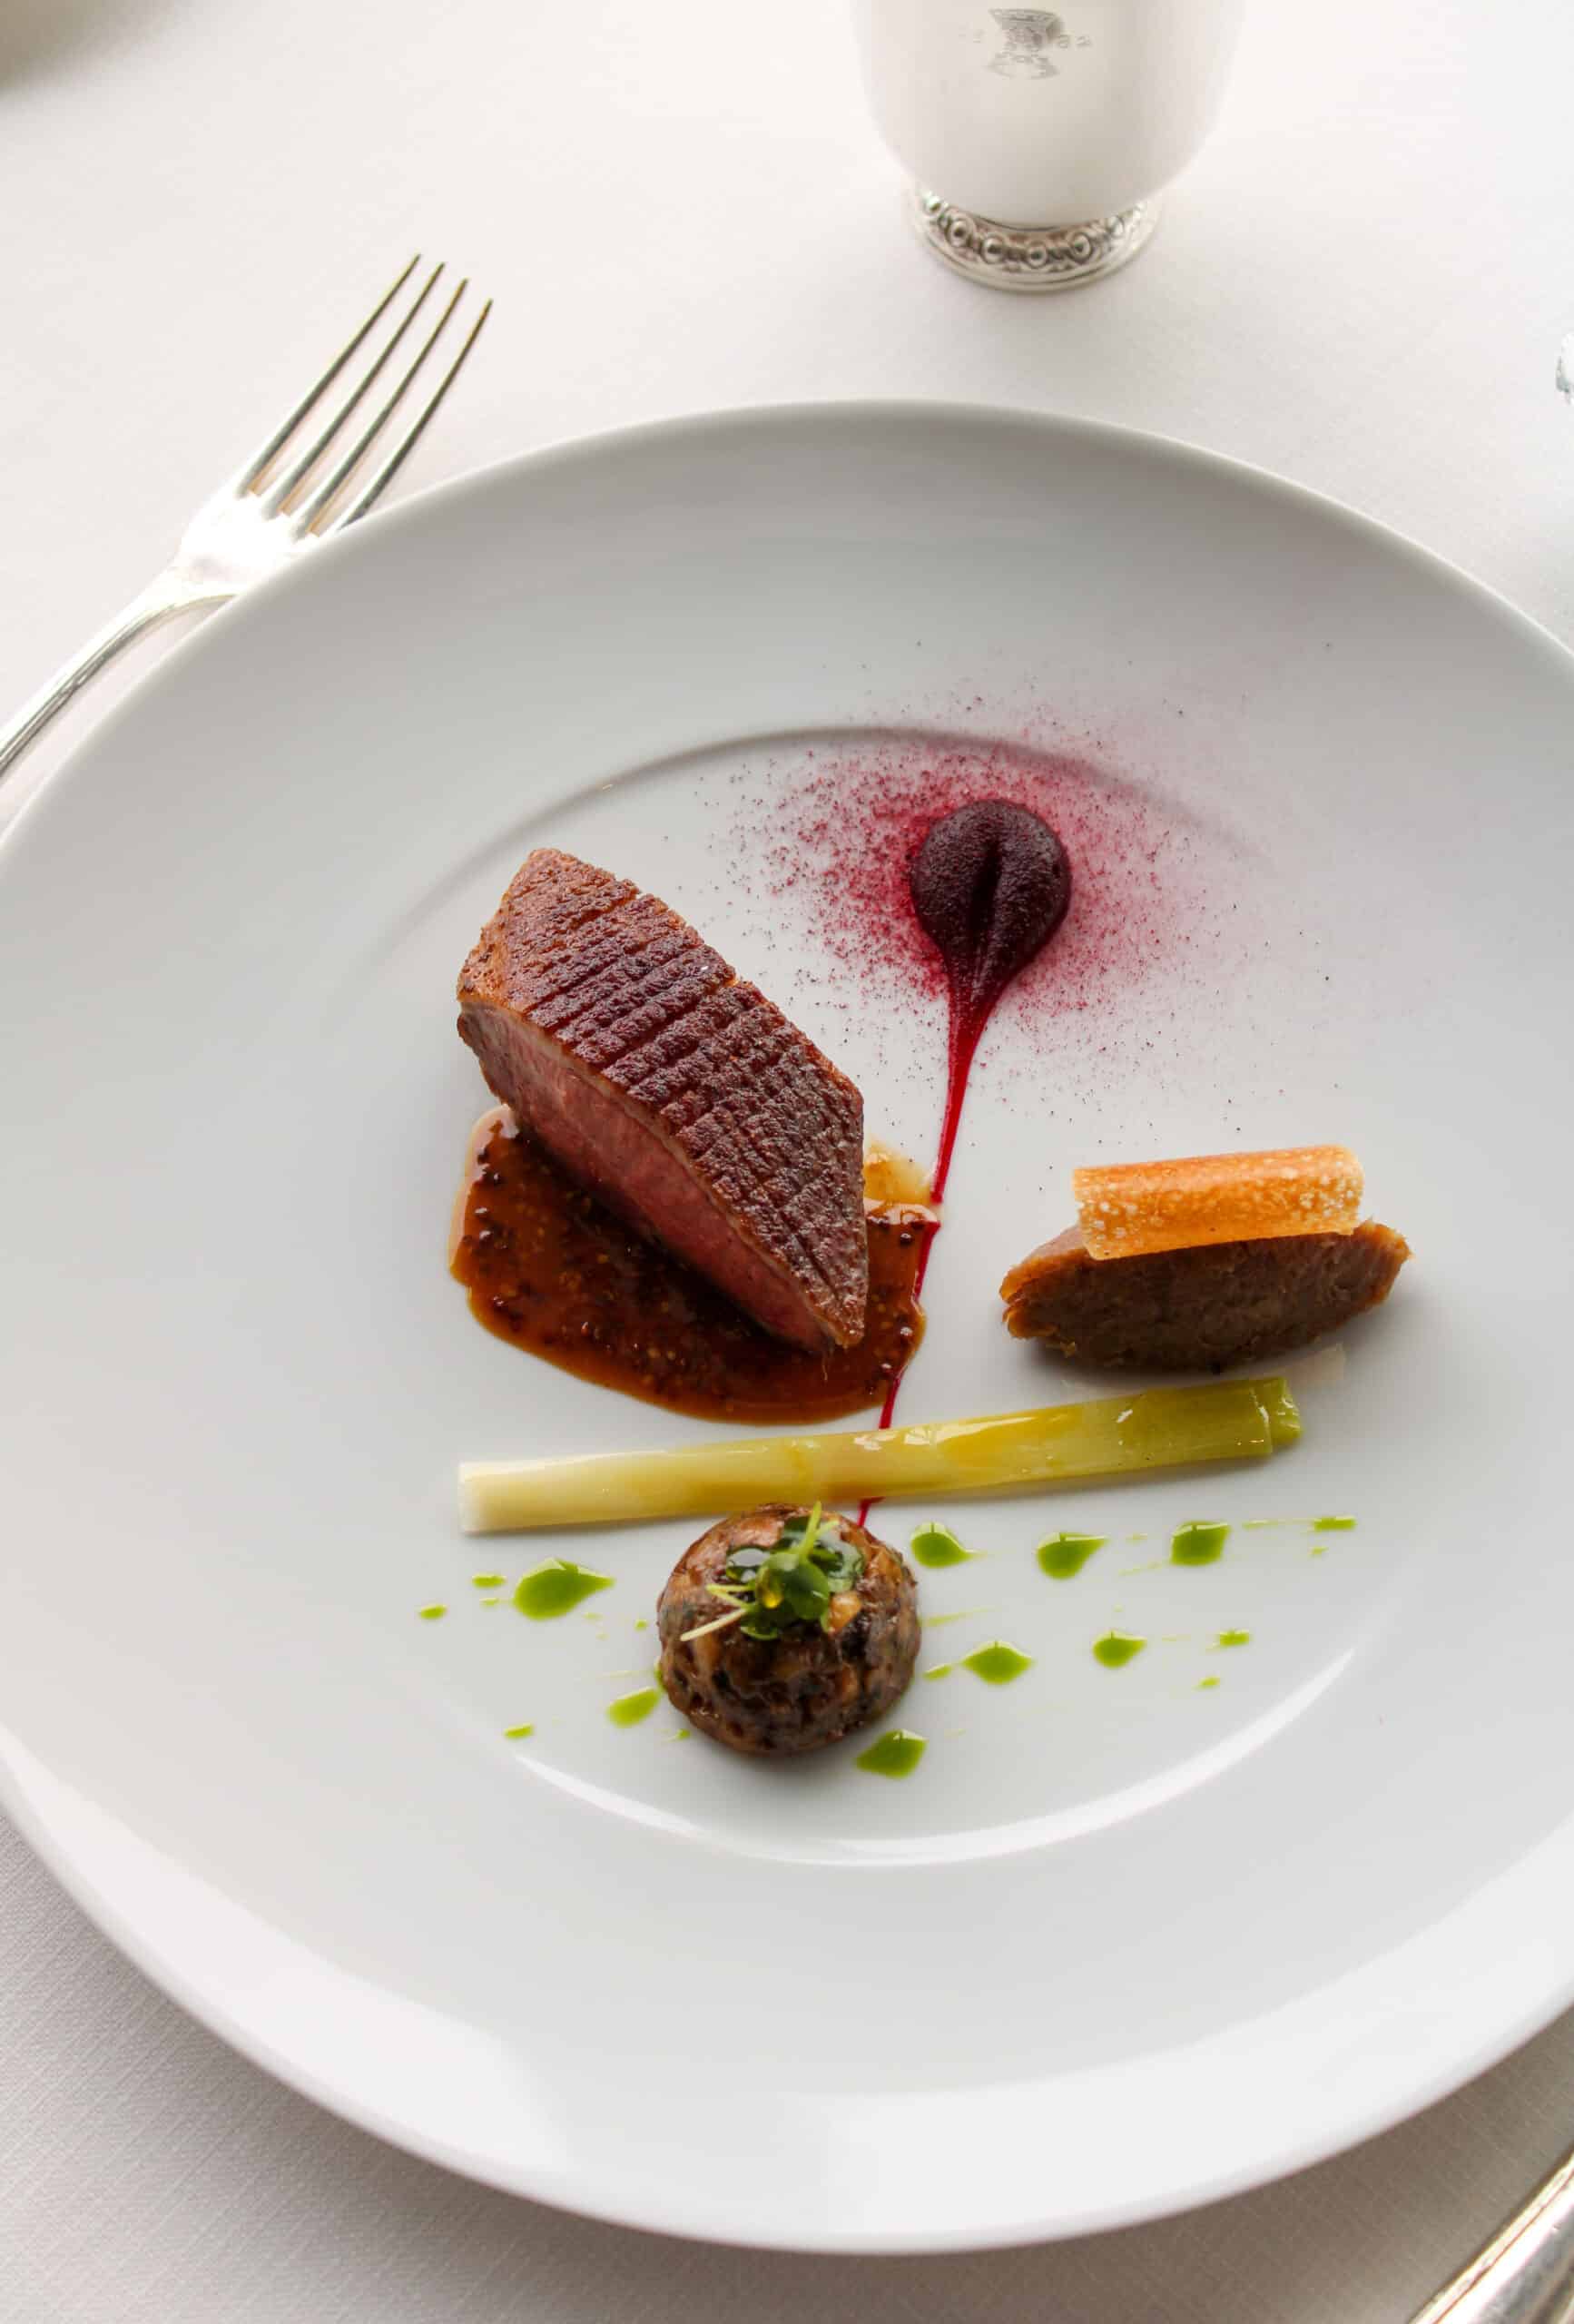 Seasonal duckling, hibiscus powdered fillet, caillette & stewed shallots, whole grain mustard juice